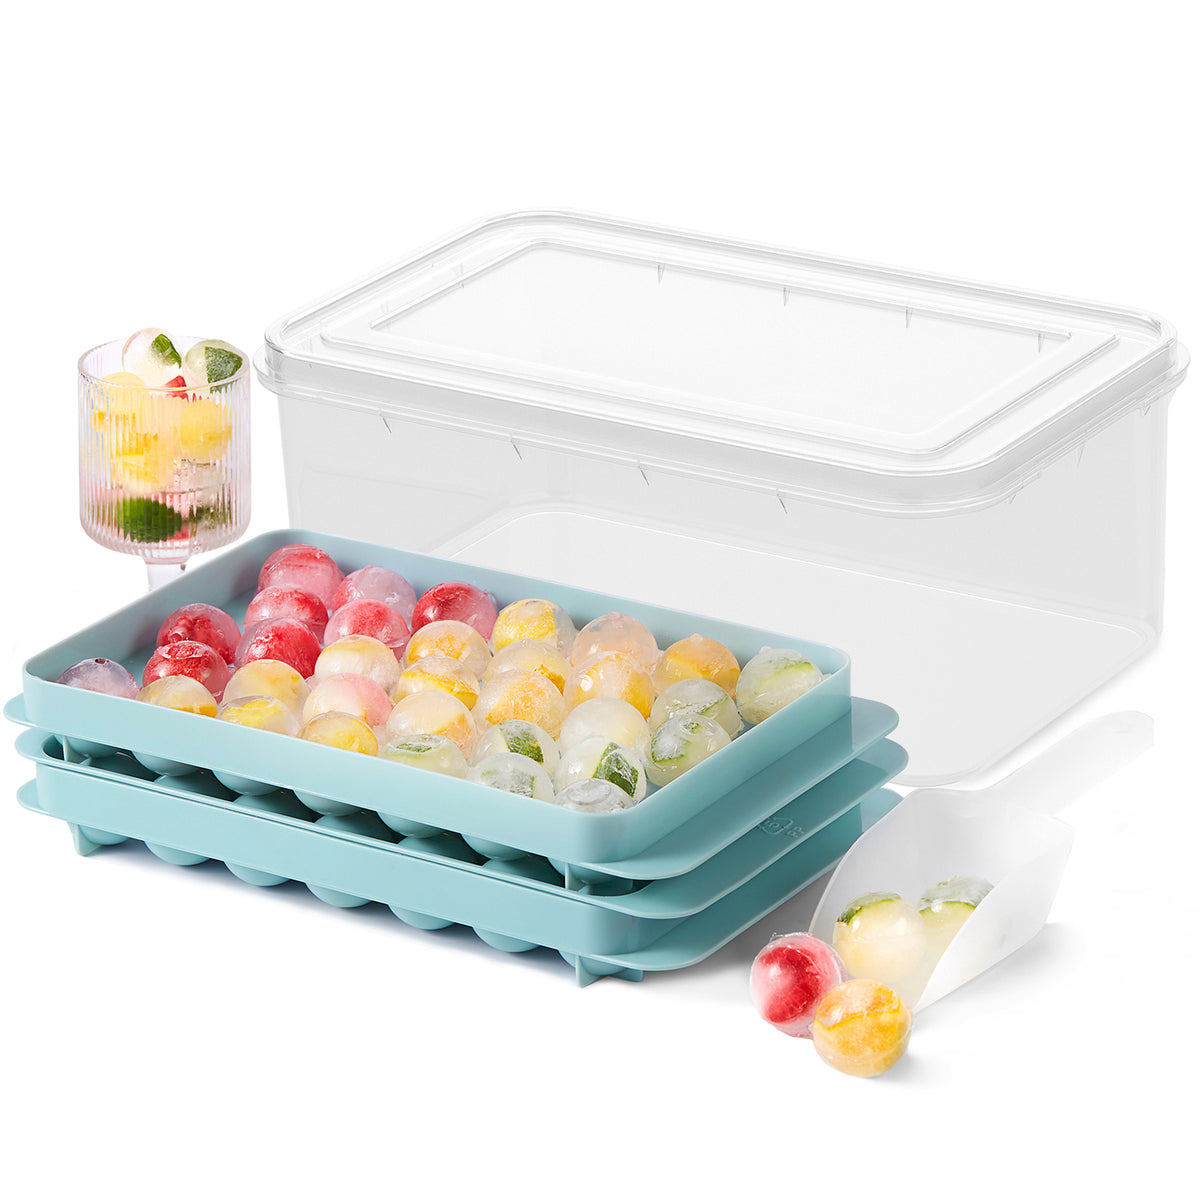 1 Set Ice Cube Tray with Lid and Bin,Plastic Ice Cube Trays for